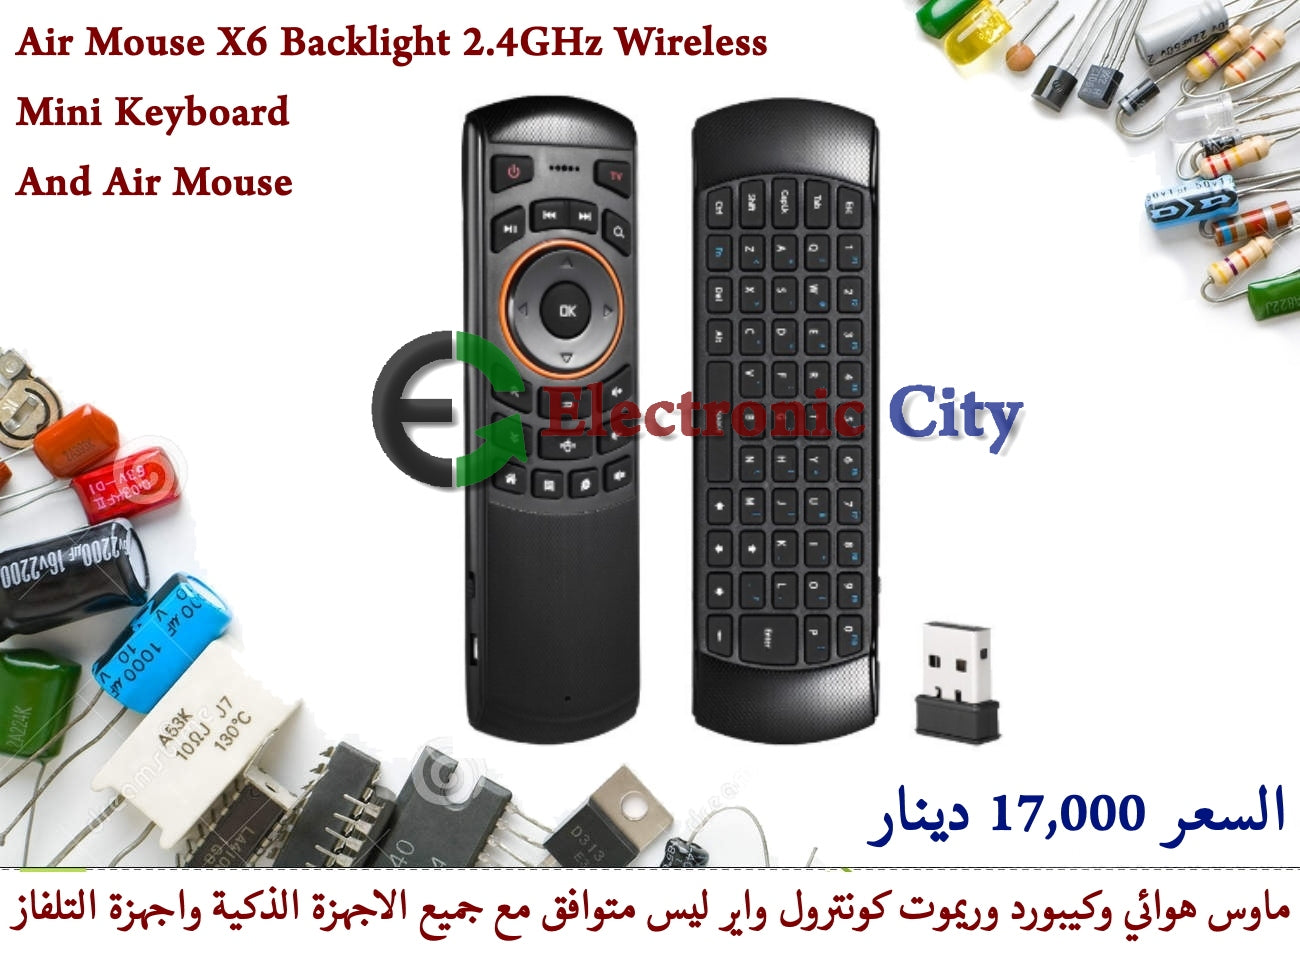 Air Mouse X6 Backlight 2.4GHz Wireless Mini Keyboard and Air Mouse Universal Remote Control